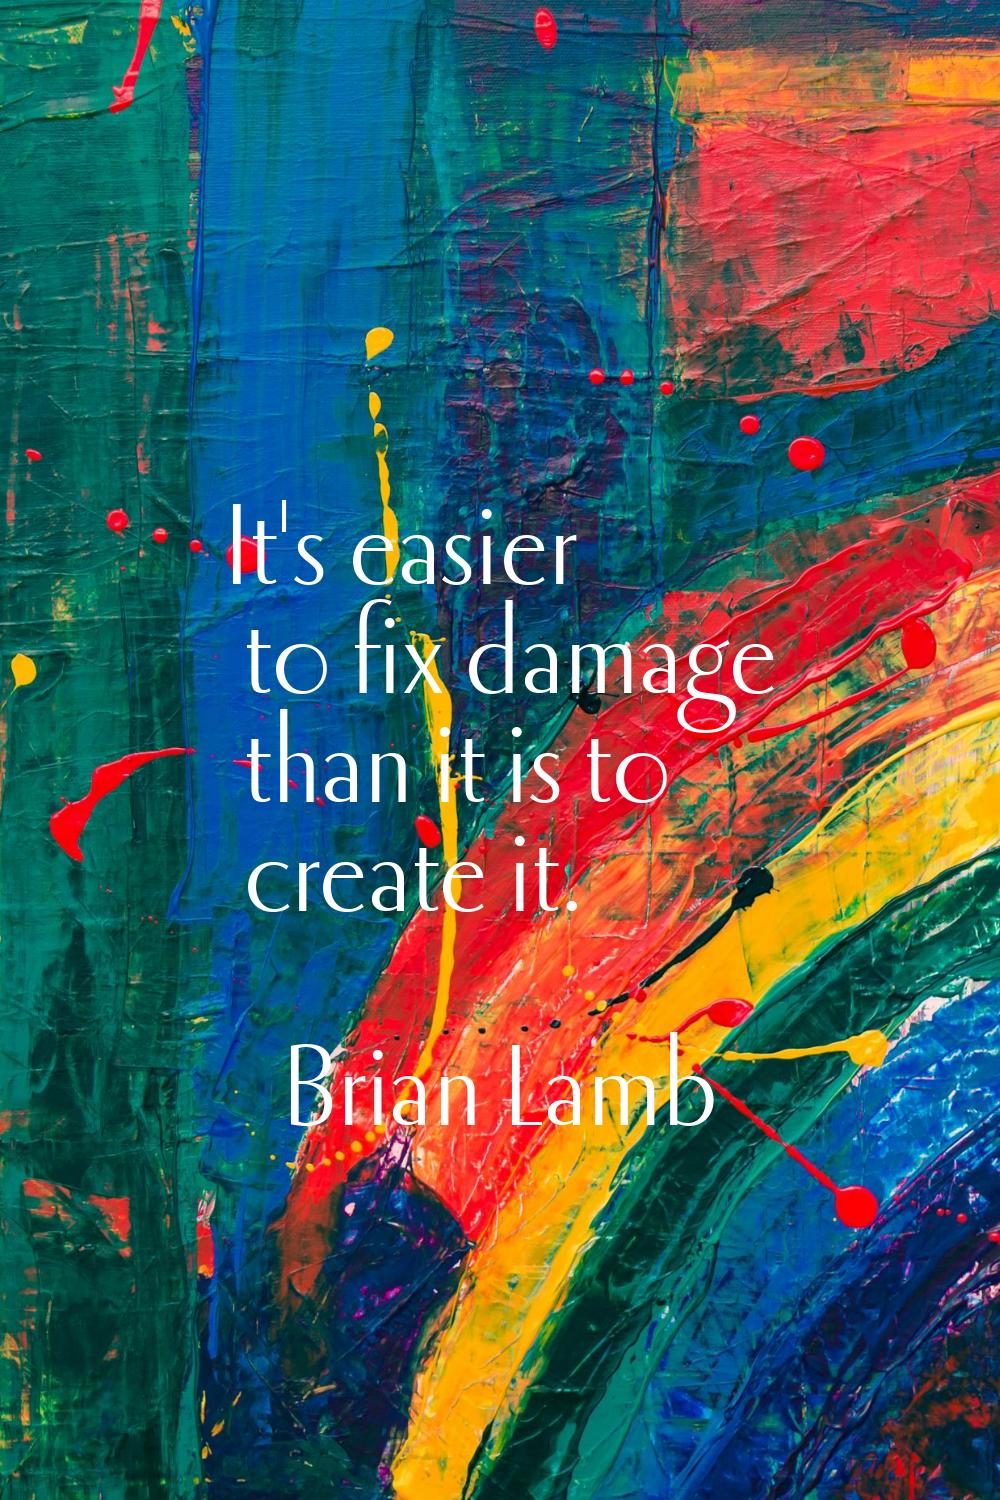 It's easier to fix damage than it is to create it.